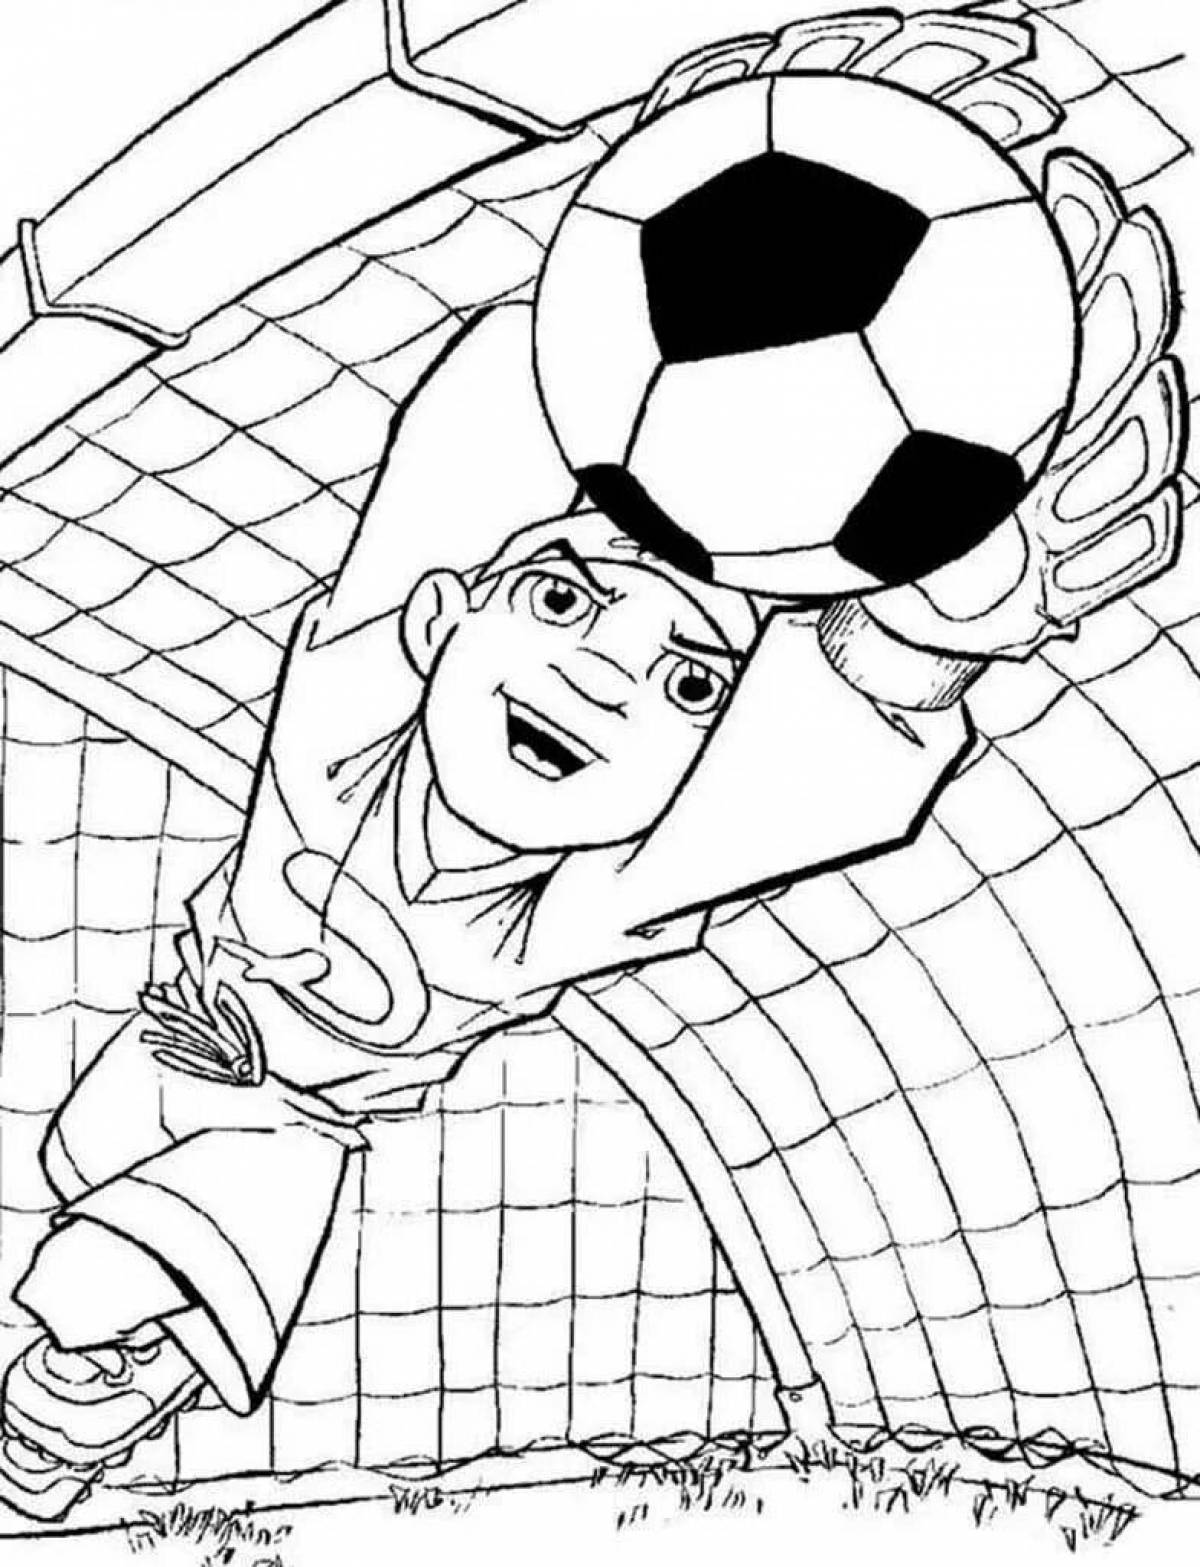 Coloring page of a fascinating football goalkeeper